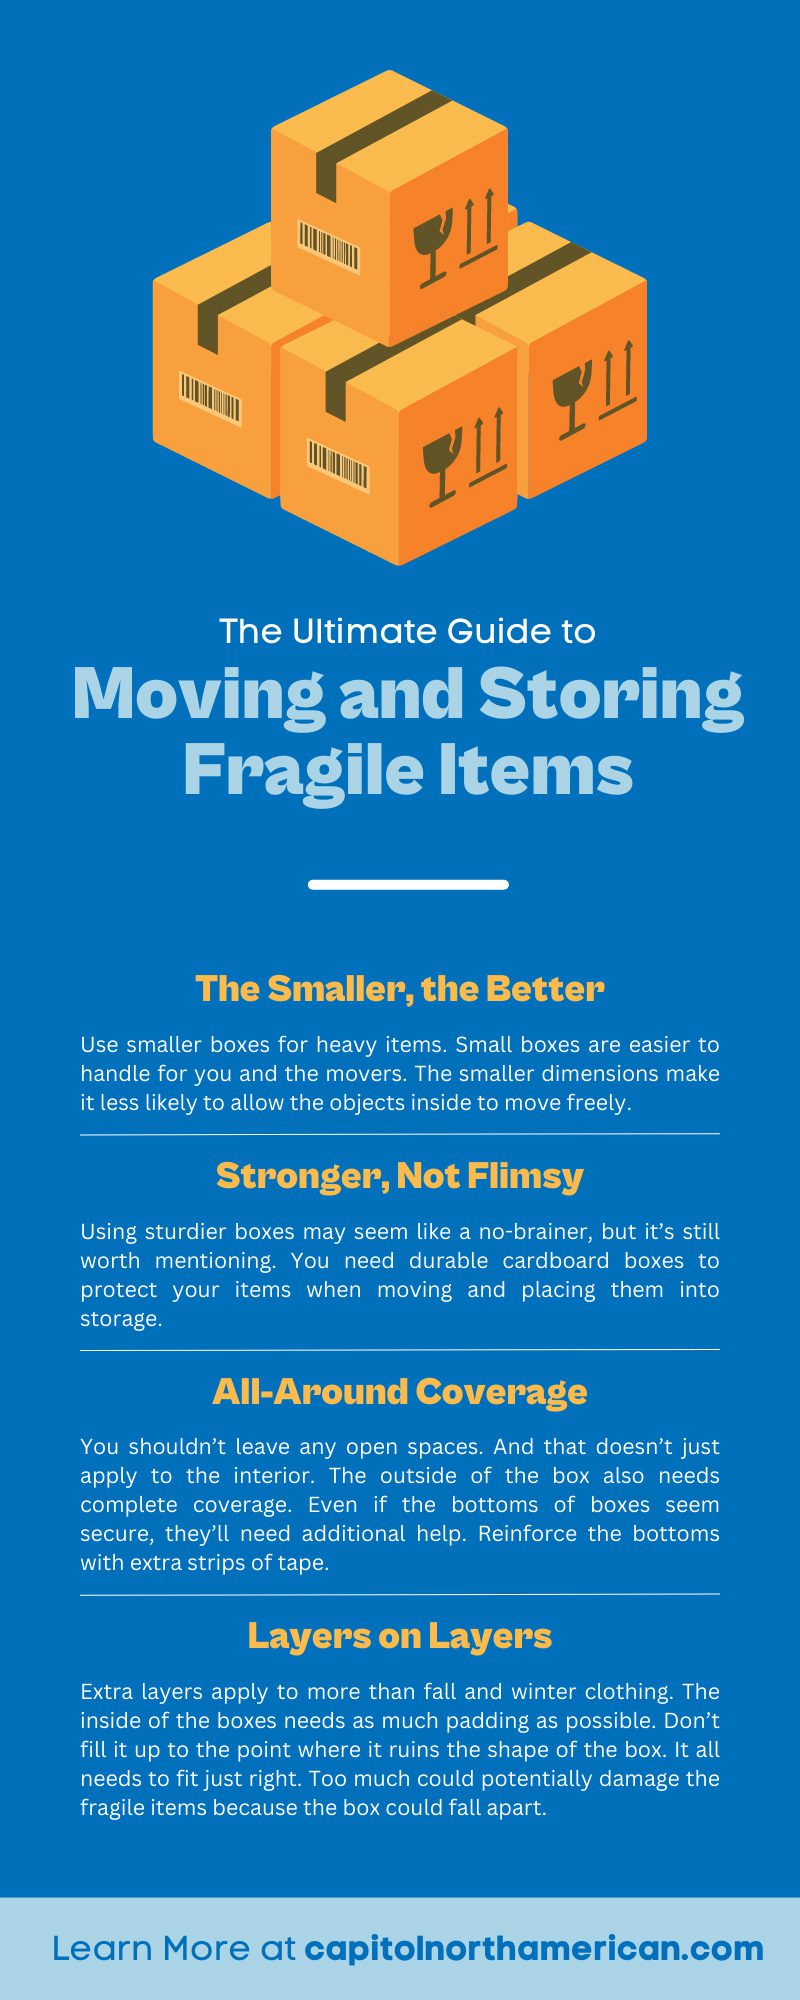 The Ultimate Guide to Moving and Storing Fragile Items